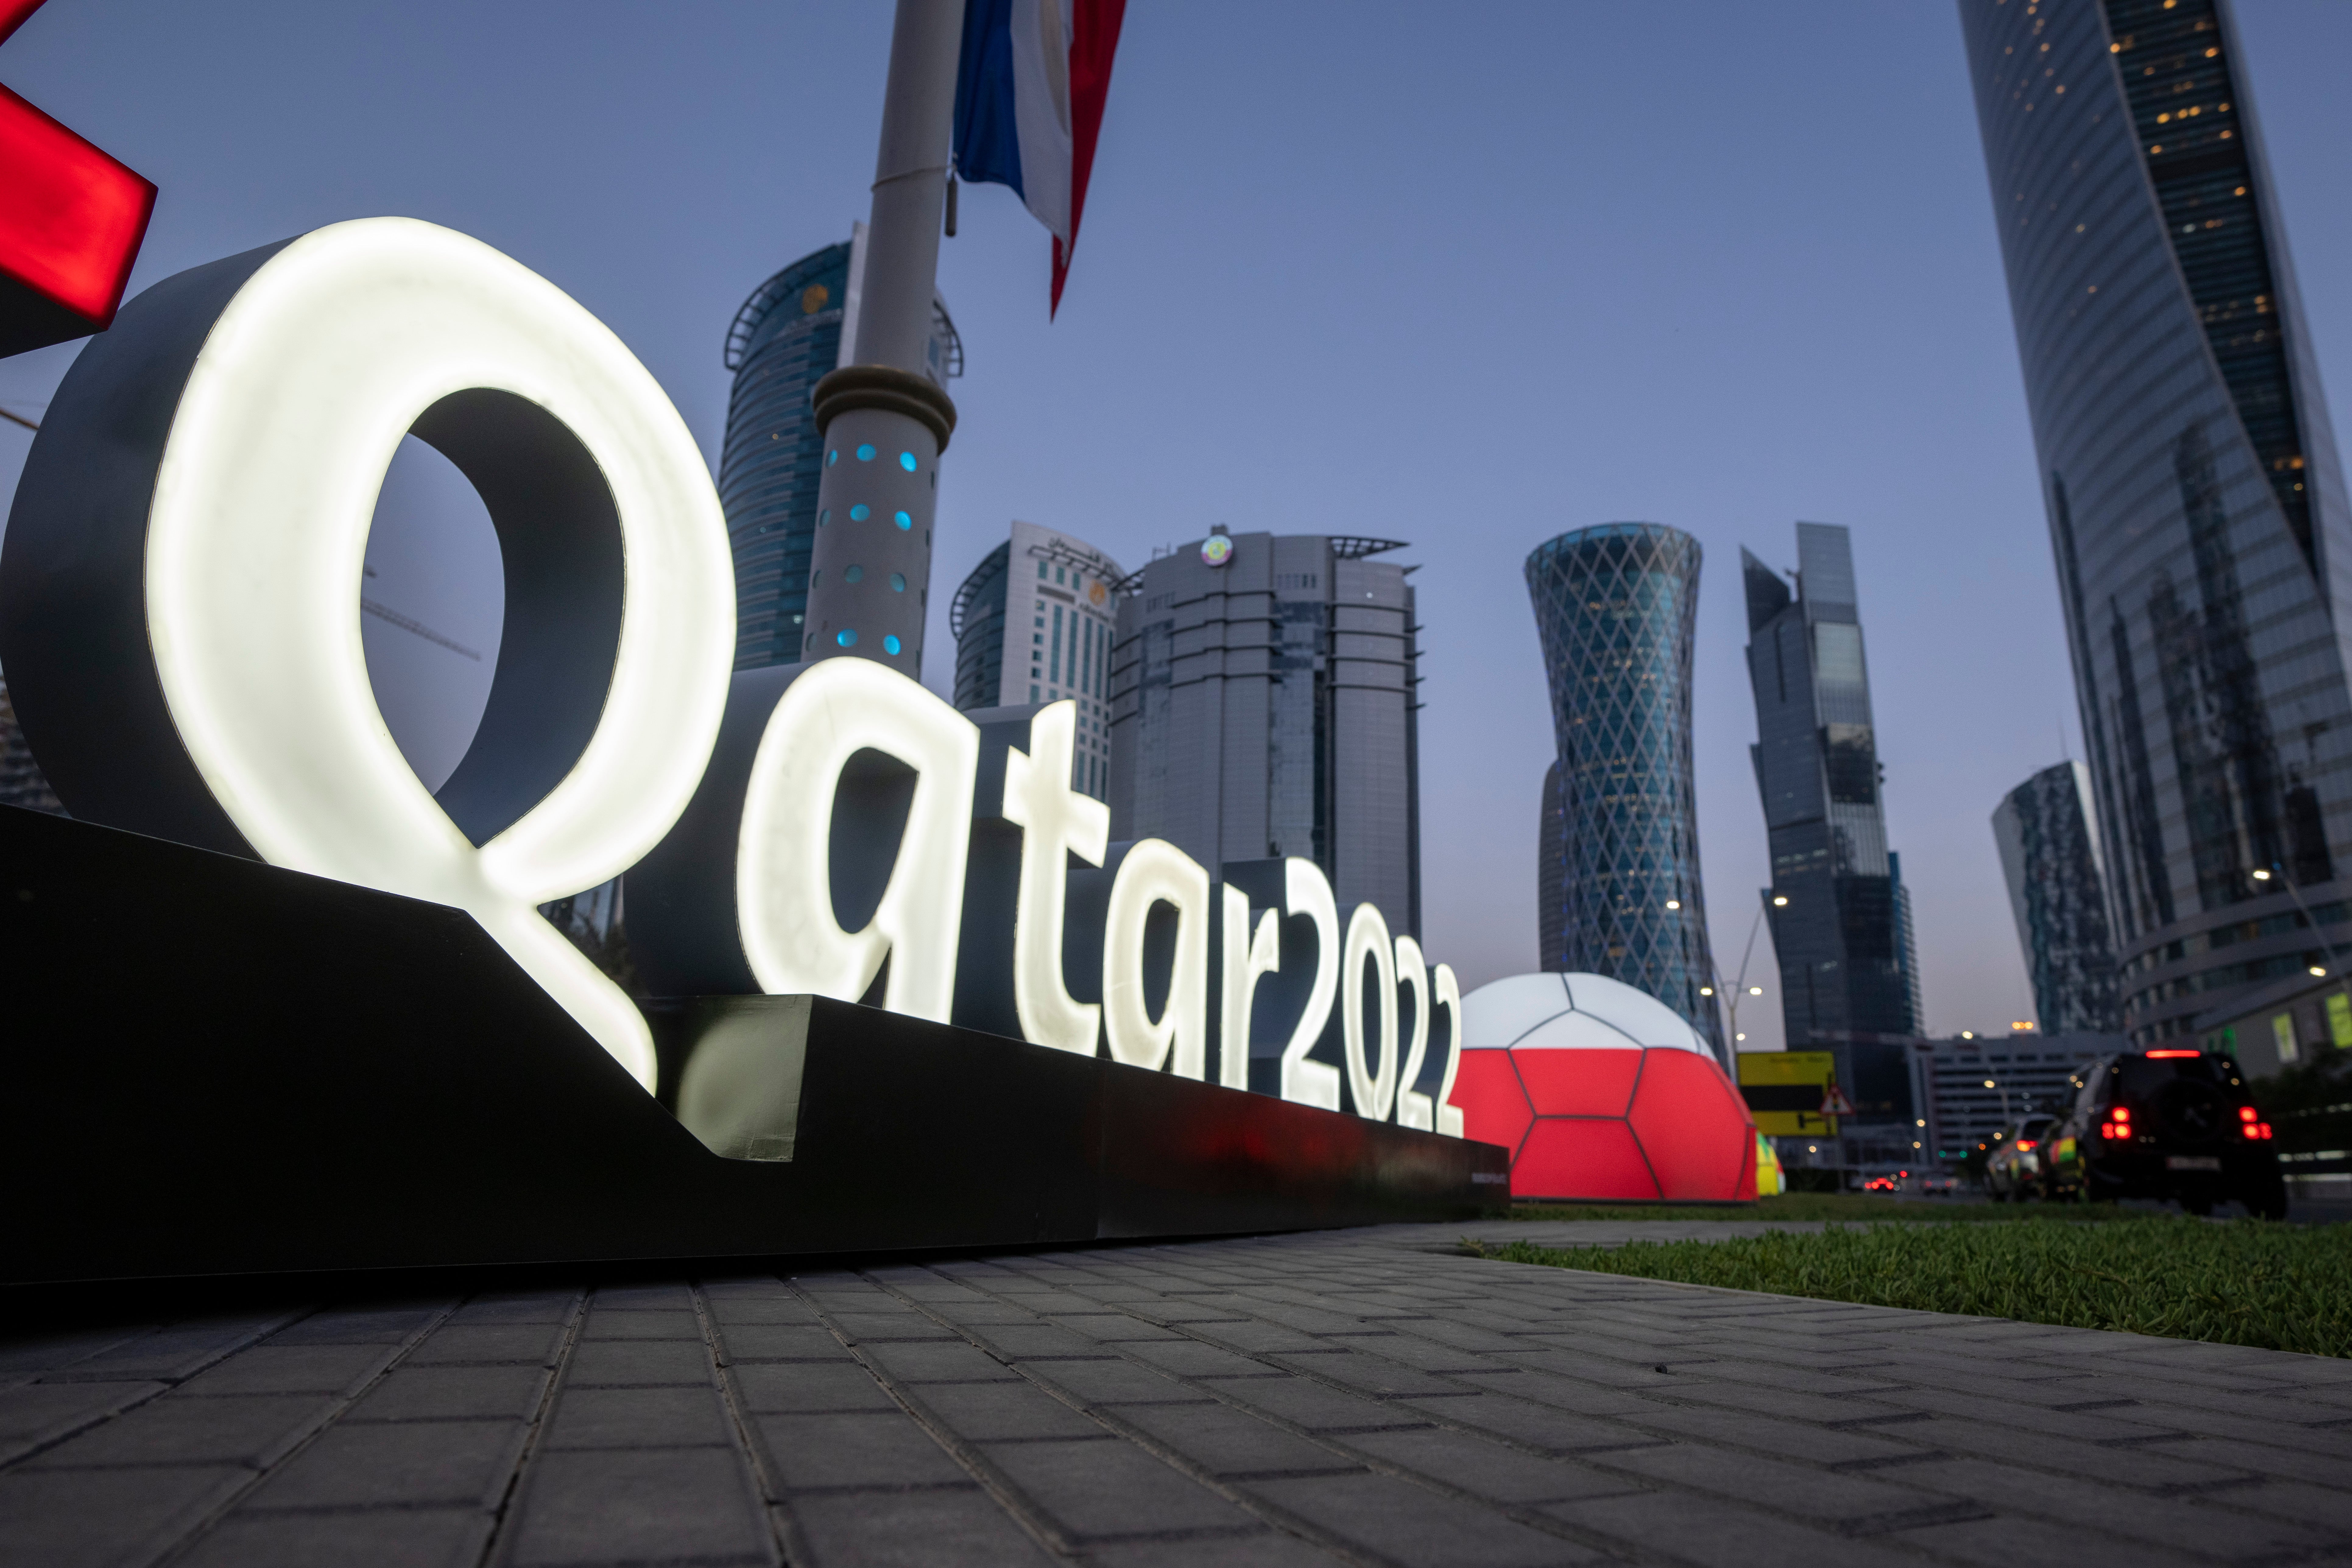 Qatari authorities and Fifa have insisted the World Cup will be open to all supporters